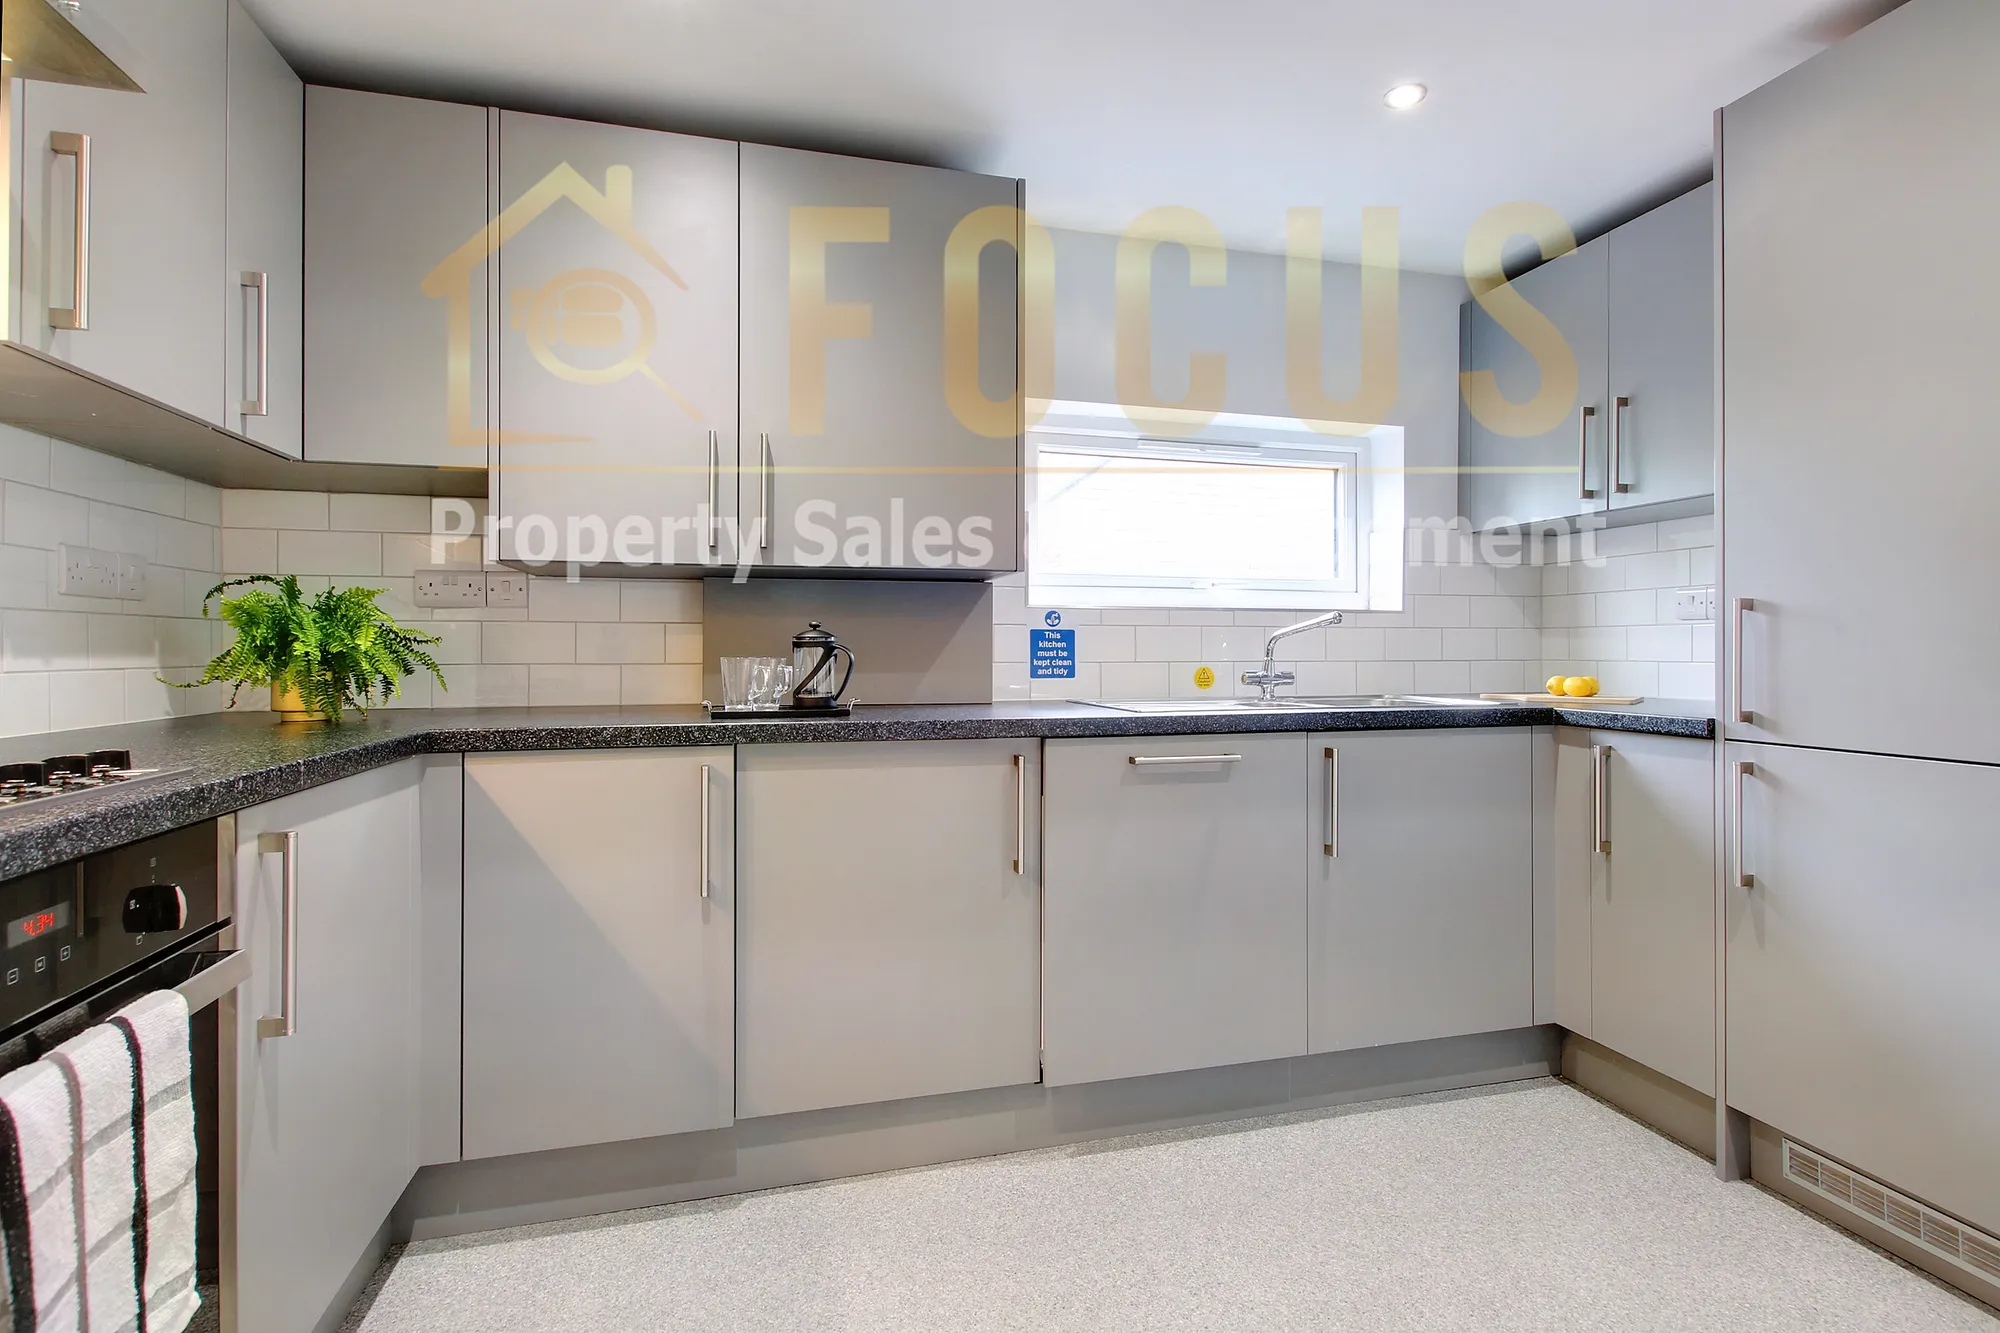 2 bed ground floor flat to rent in Clarendon Park Road, Leicester  - Property Image 3